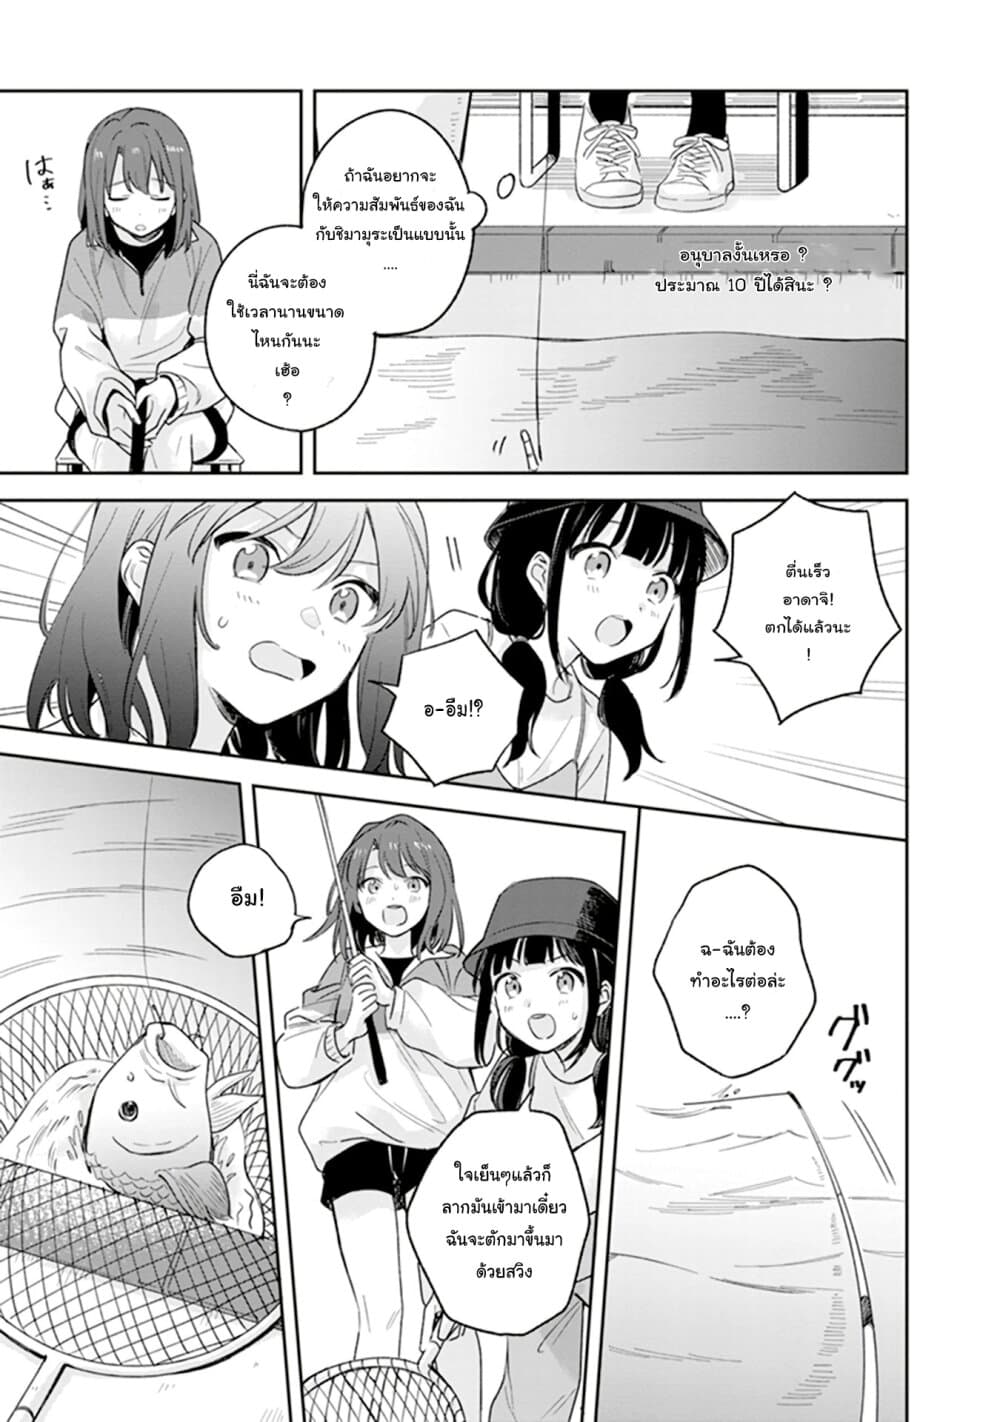 Adachi-to-Shimamura-Official-Comic-Anthology-Chapter1-9.jpg